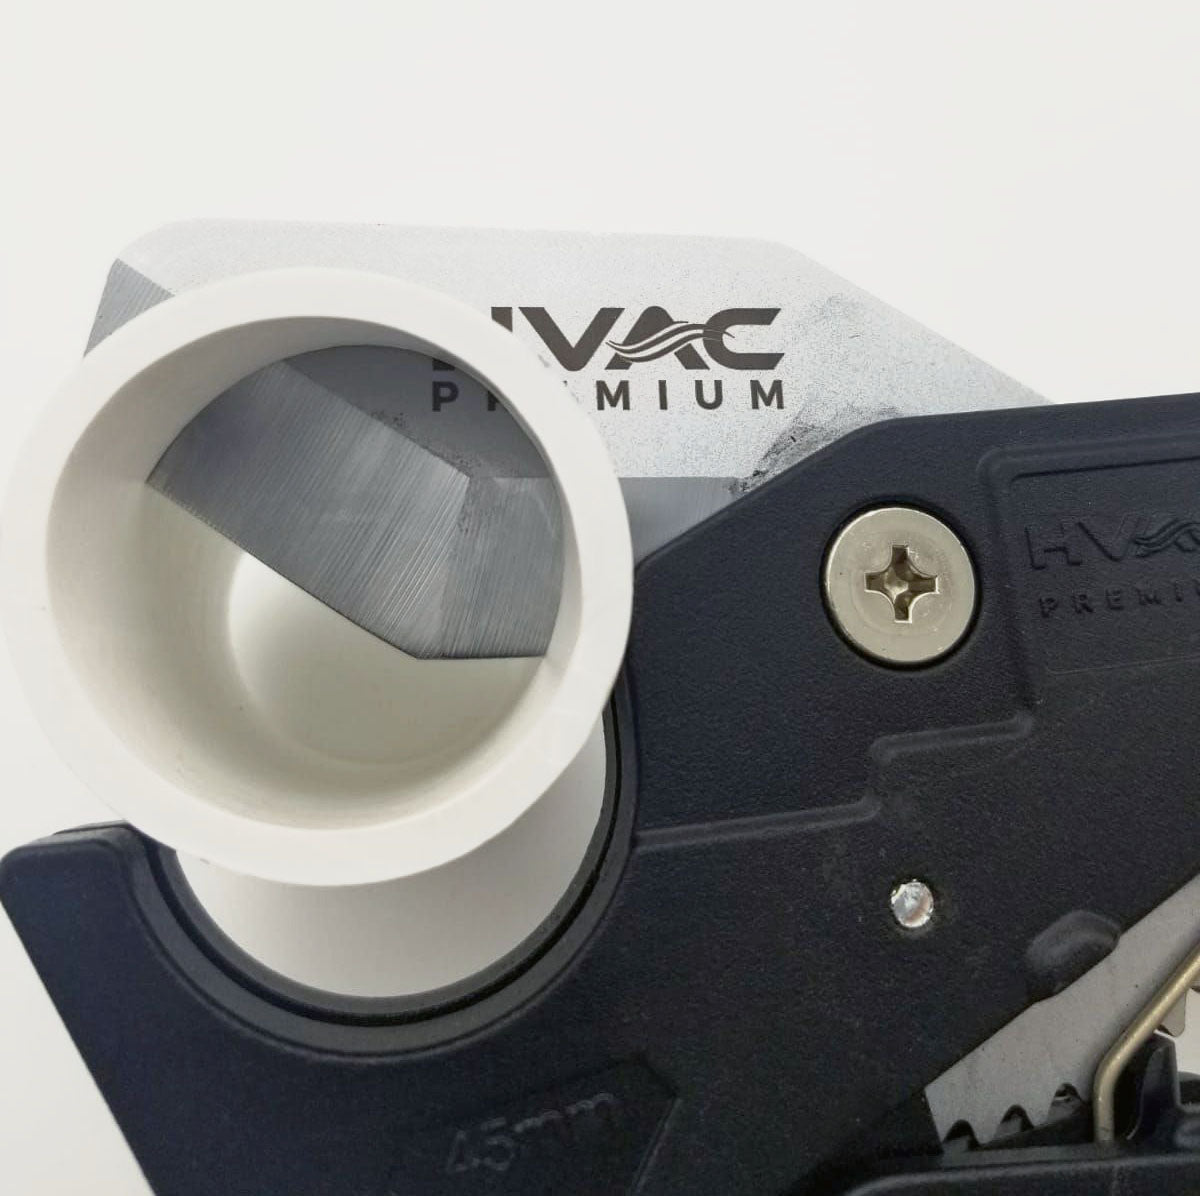 HVAC Premium Heavy Duty Automatic PVC Pipe Cutter 36mm For Cutting Thin/Thick PVC 36mm & Below 